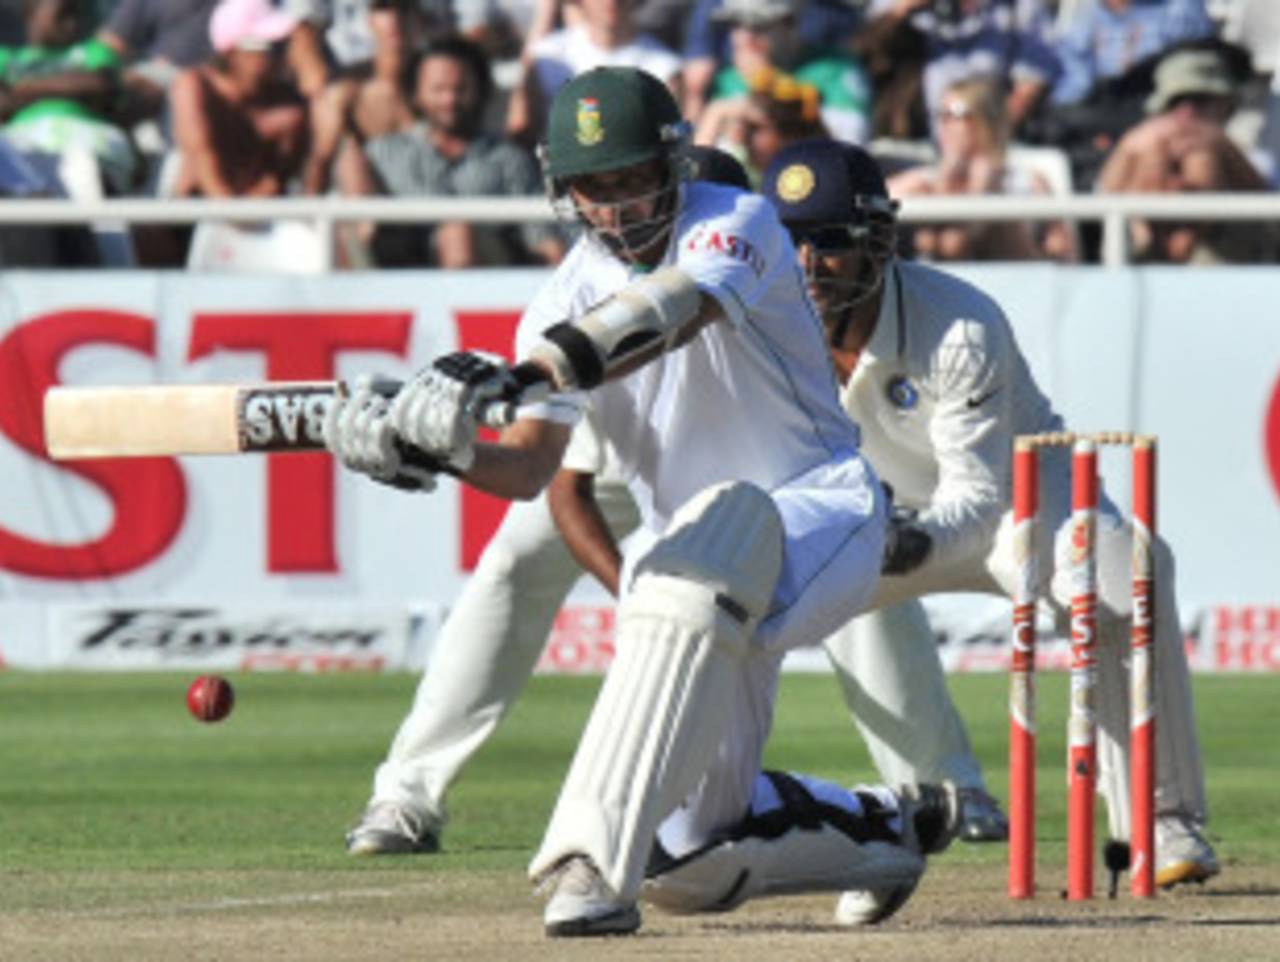 Alviro Peterson plays the sweep against Harbhajan Singh, South Africa v India, 3rd Test, Cape Town, 3rd day, January 4, 2011